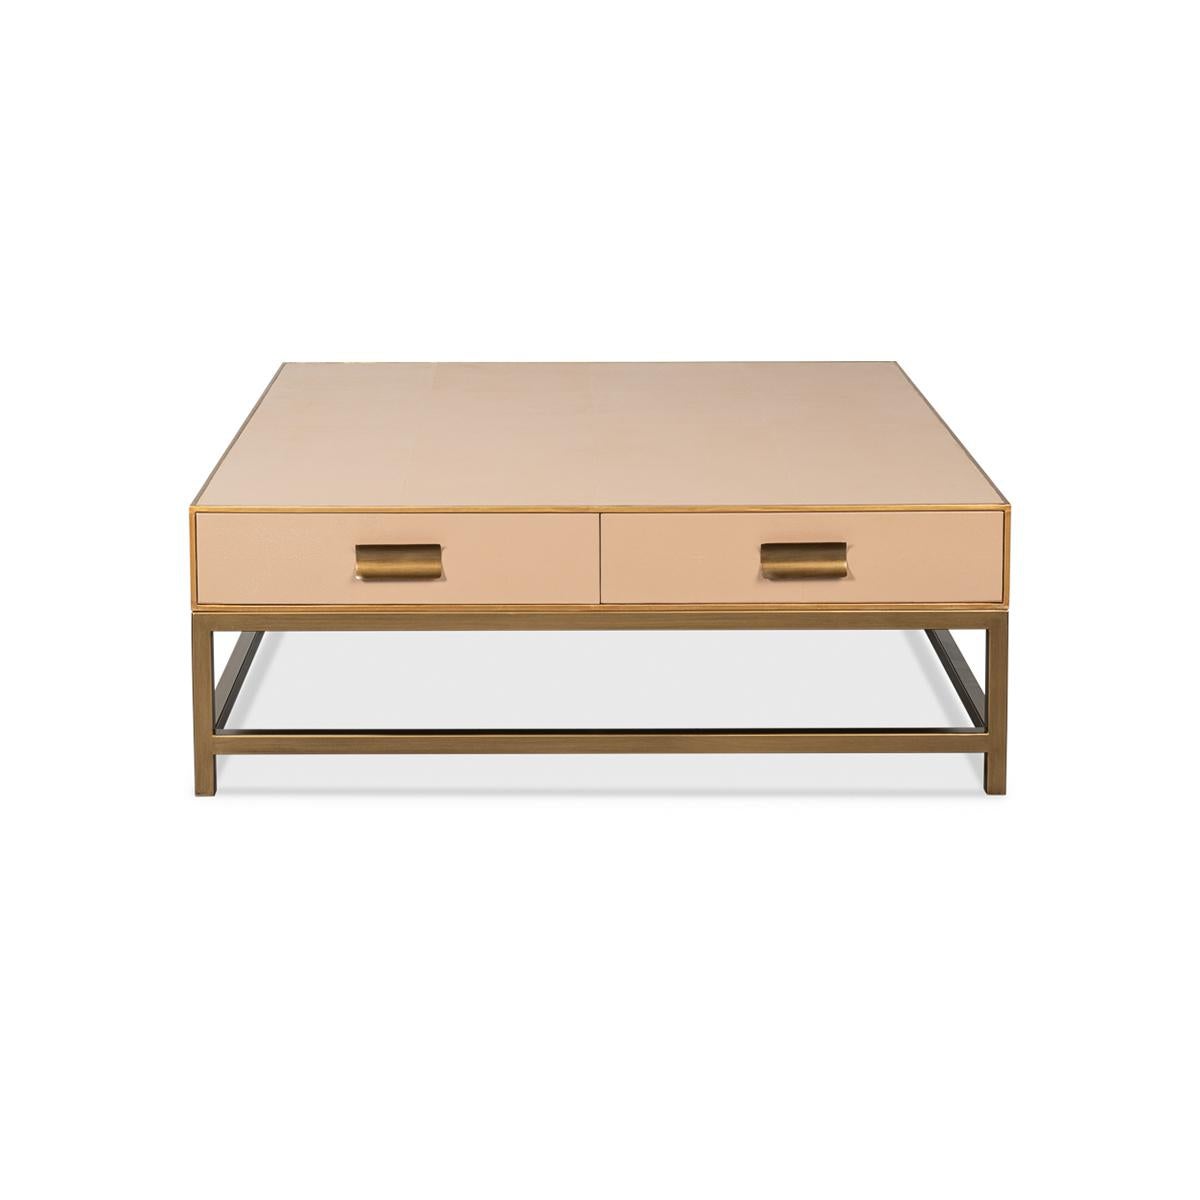 Crafted from wood with a shagreen embossed leather wrapped top, this square coffee table is finished with gold trim and hardware. With two drawers and raised on cube-form base with stretchers. 
The low-profile design makes it ideal for a functional